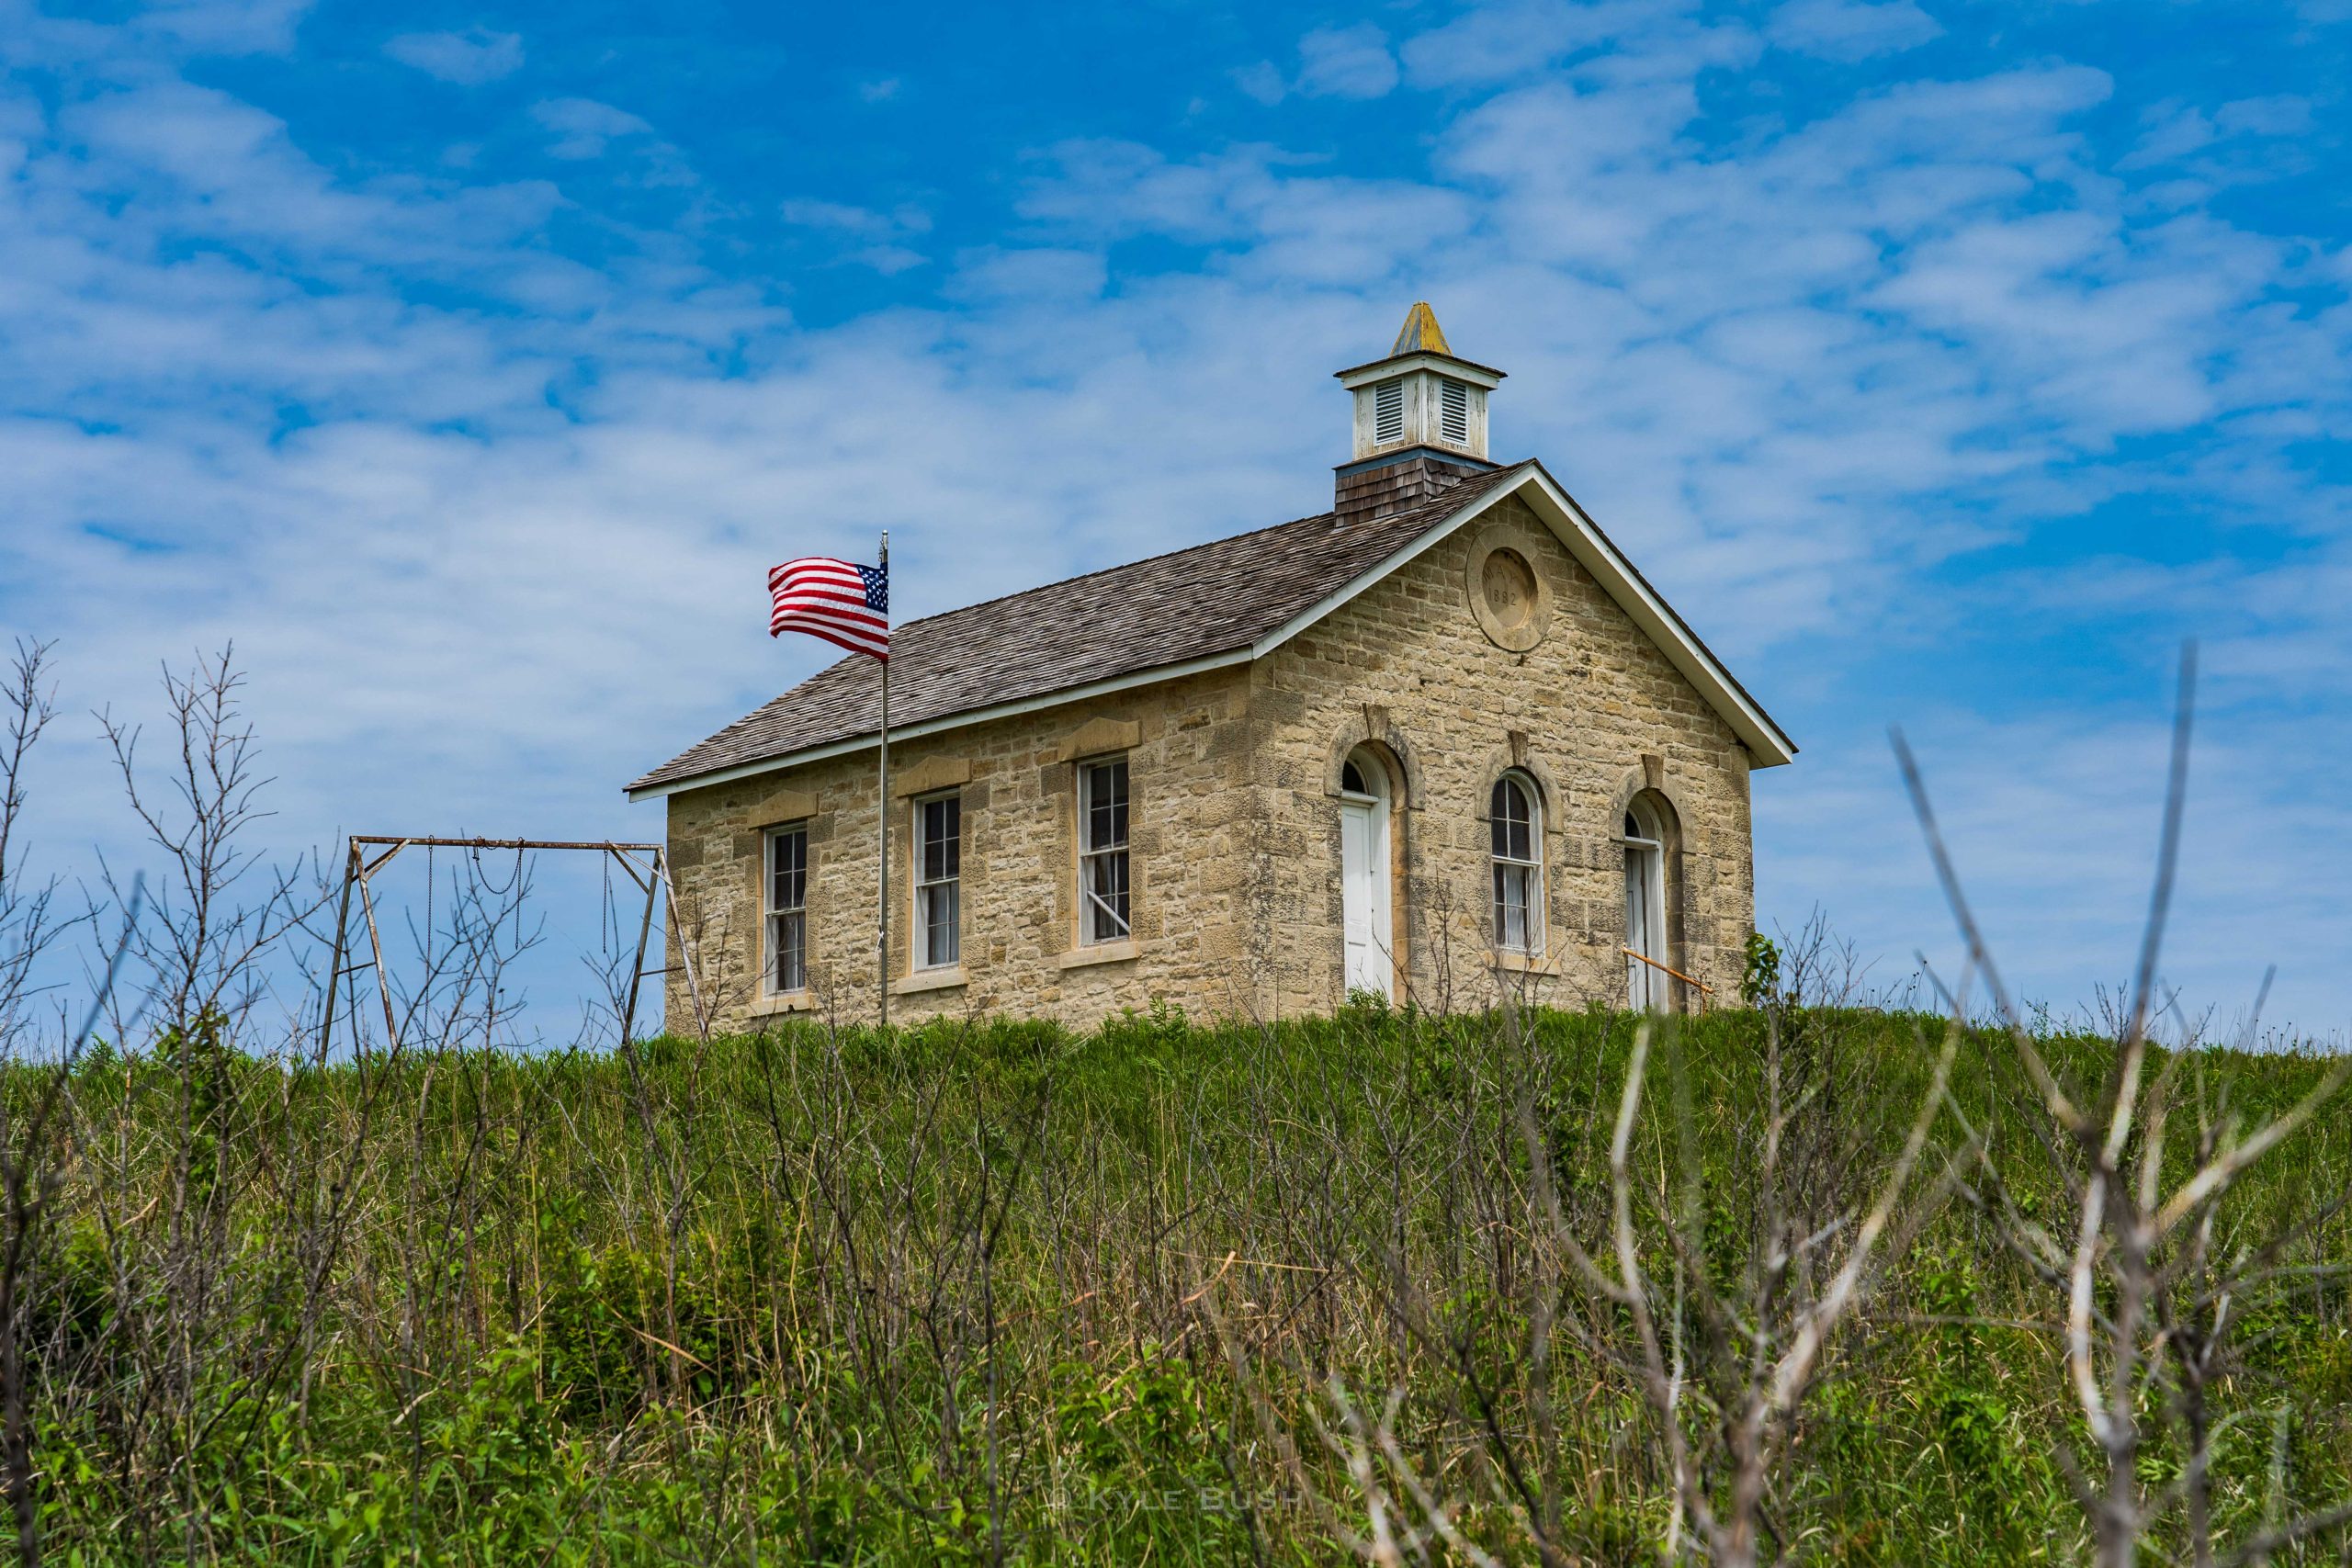 One-room schoolhouses still educate visitors Schools housed generations of young learners in 19th, early 20th centuries